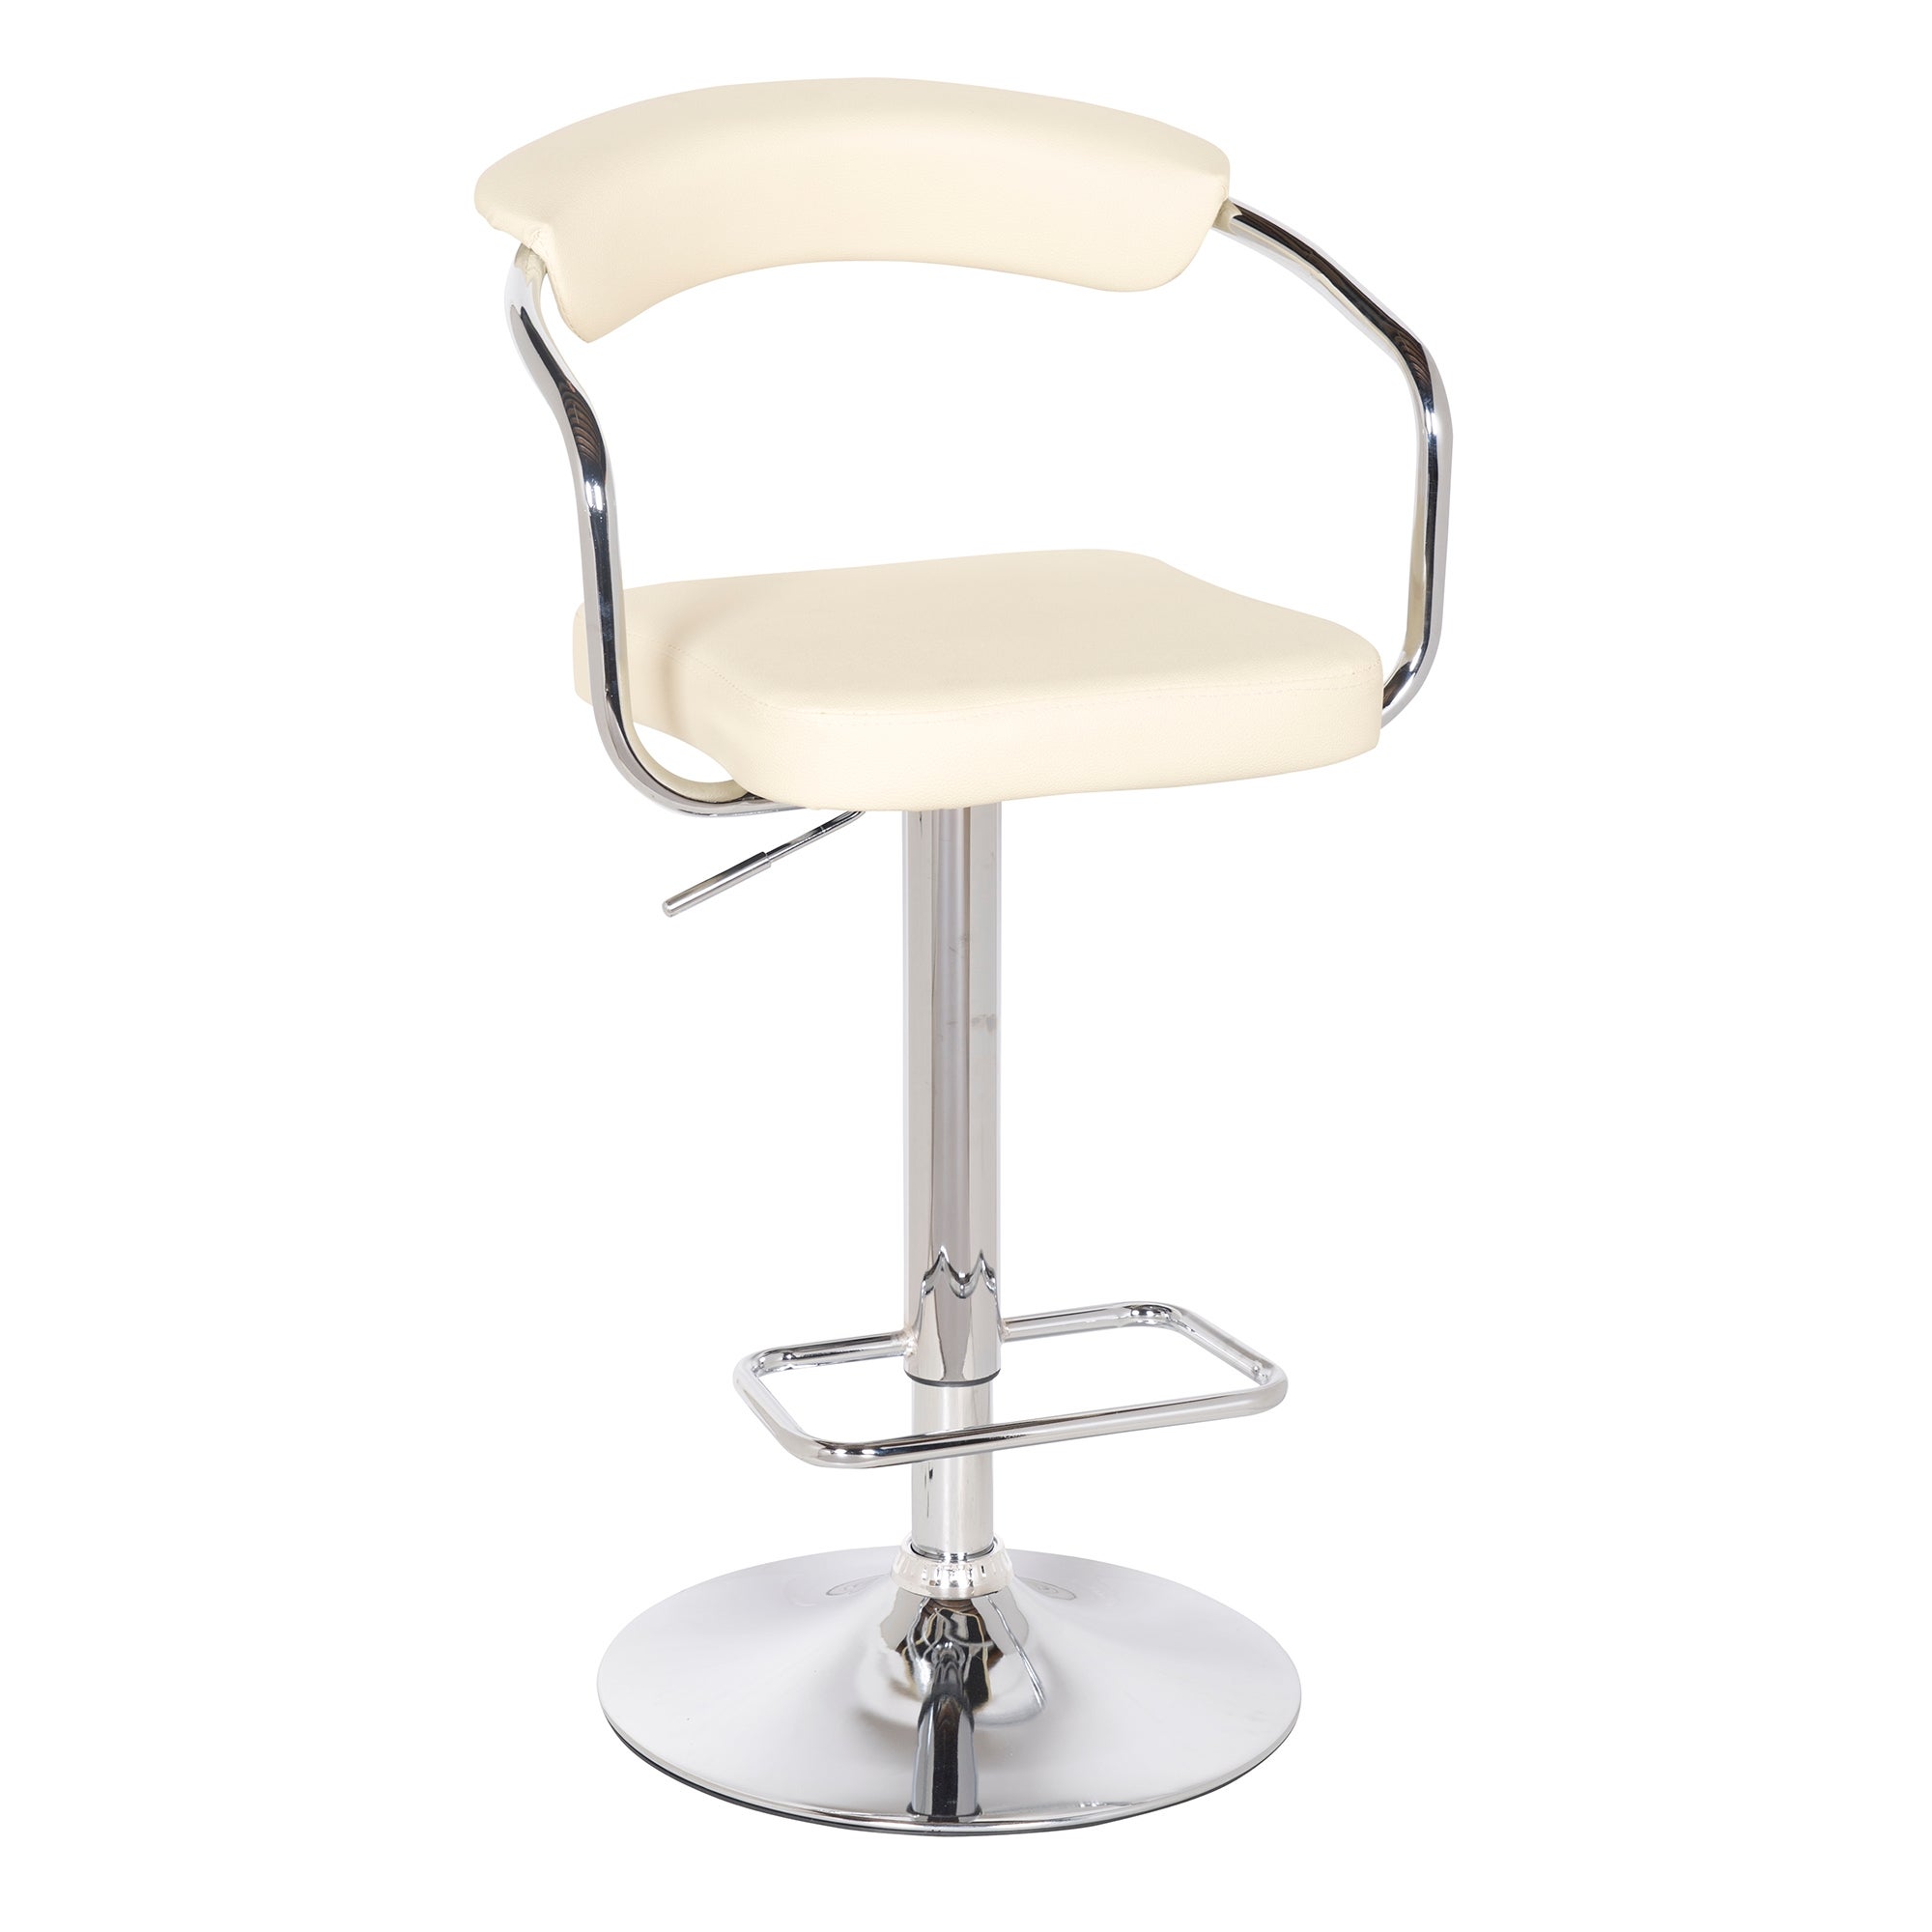 Houston Adjustable Height Swivel Bar Stool Faux Leather Cream Natural